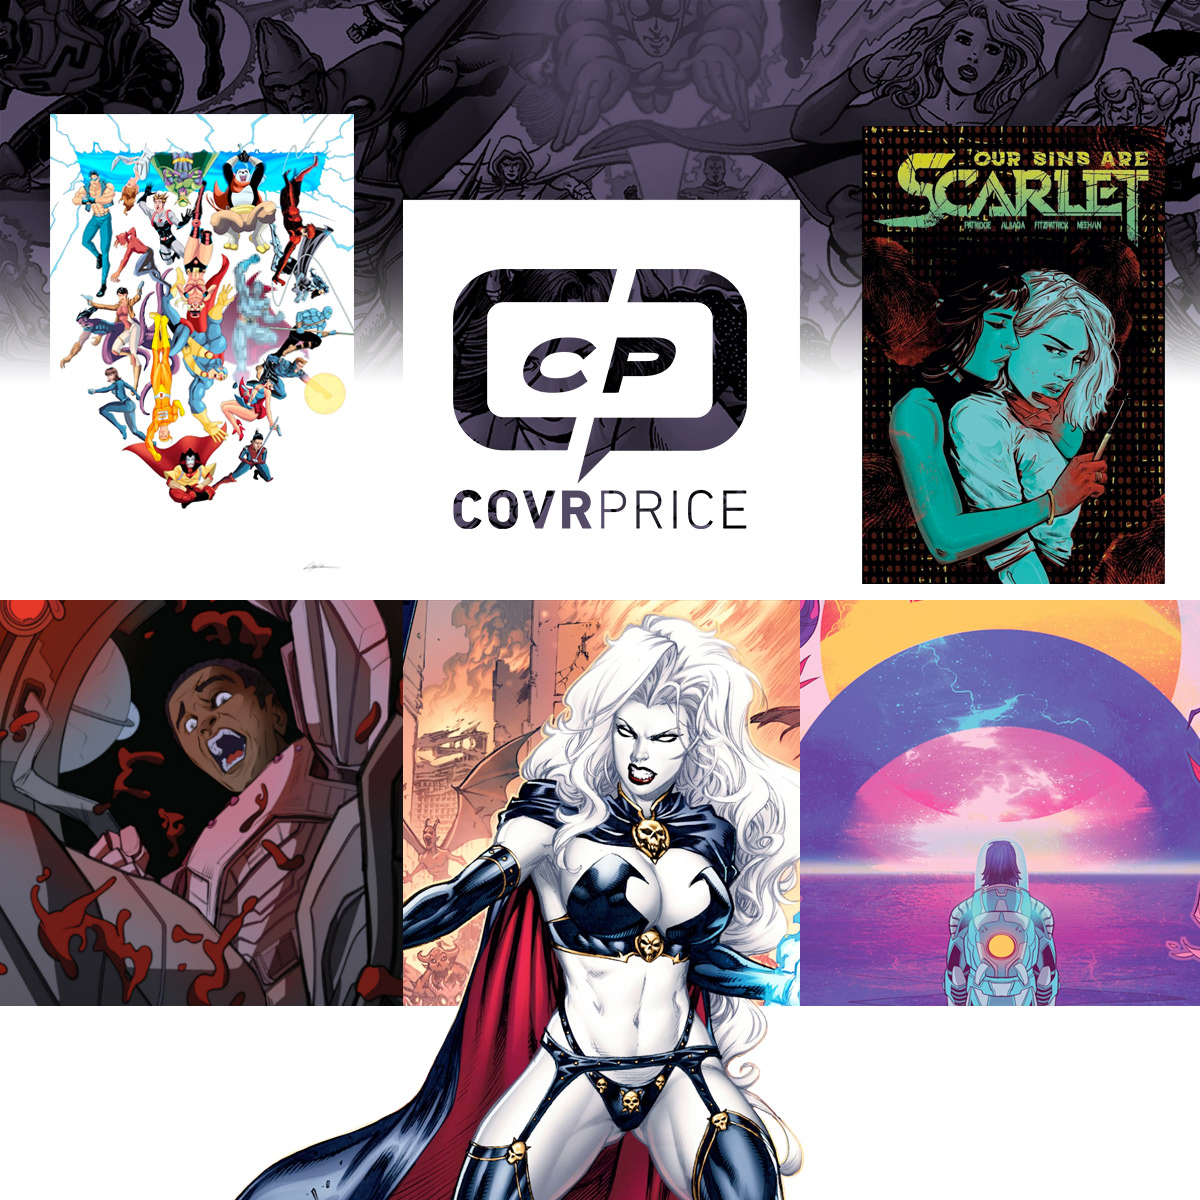 More great Crowdfunding comic projects to keep your eyes on! It’s our March Report! With @carlosgiffoni @juandoe @christofbogacs @thecoffincomics @GoldKeyComic @nirlevie @EndigoMaster @scottlost & more! #crowdfunding #comics #kickstartercomics LINK: covrprice.com/cp-content/202…